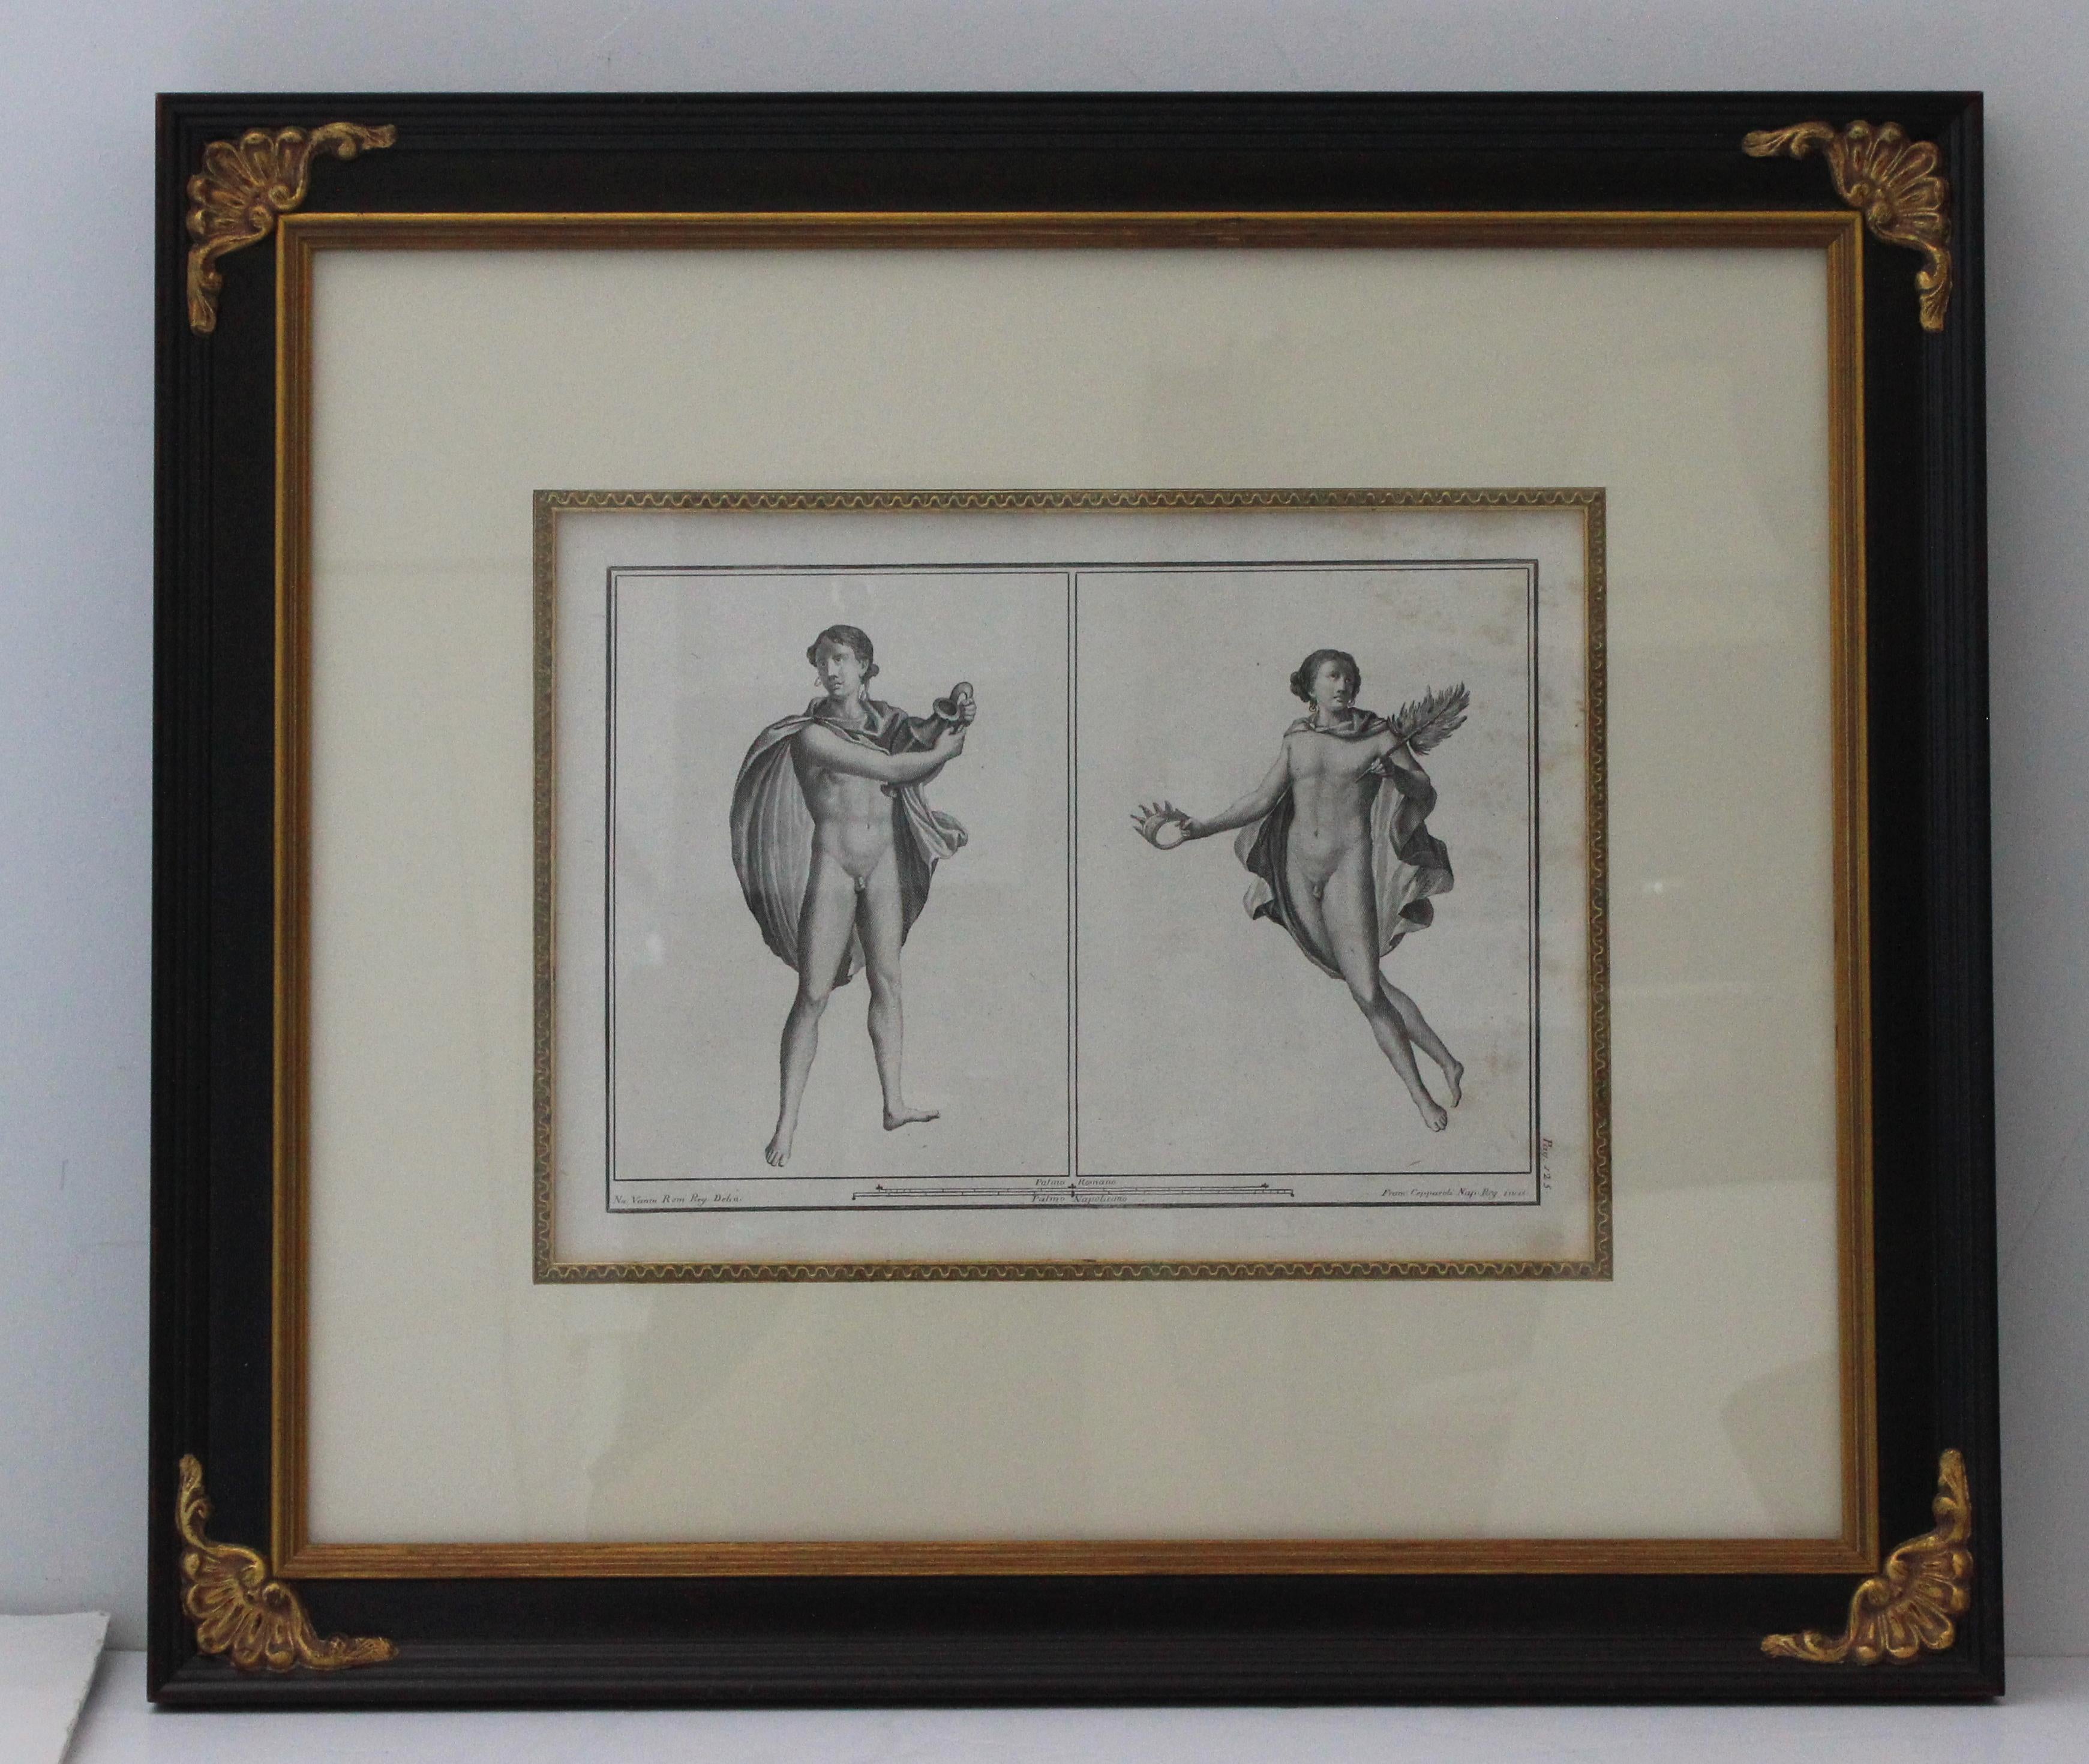 Italian Set of Two 18th Century Classical Engravings